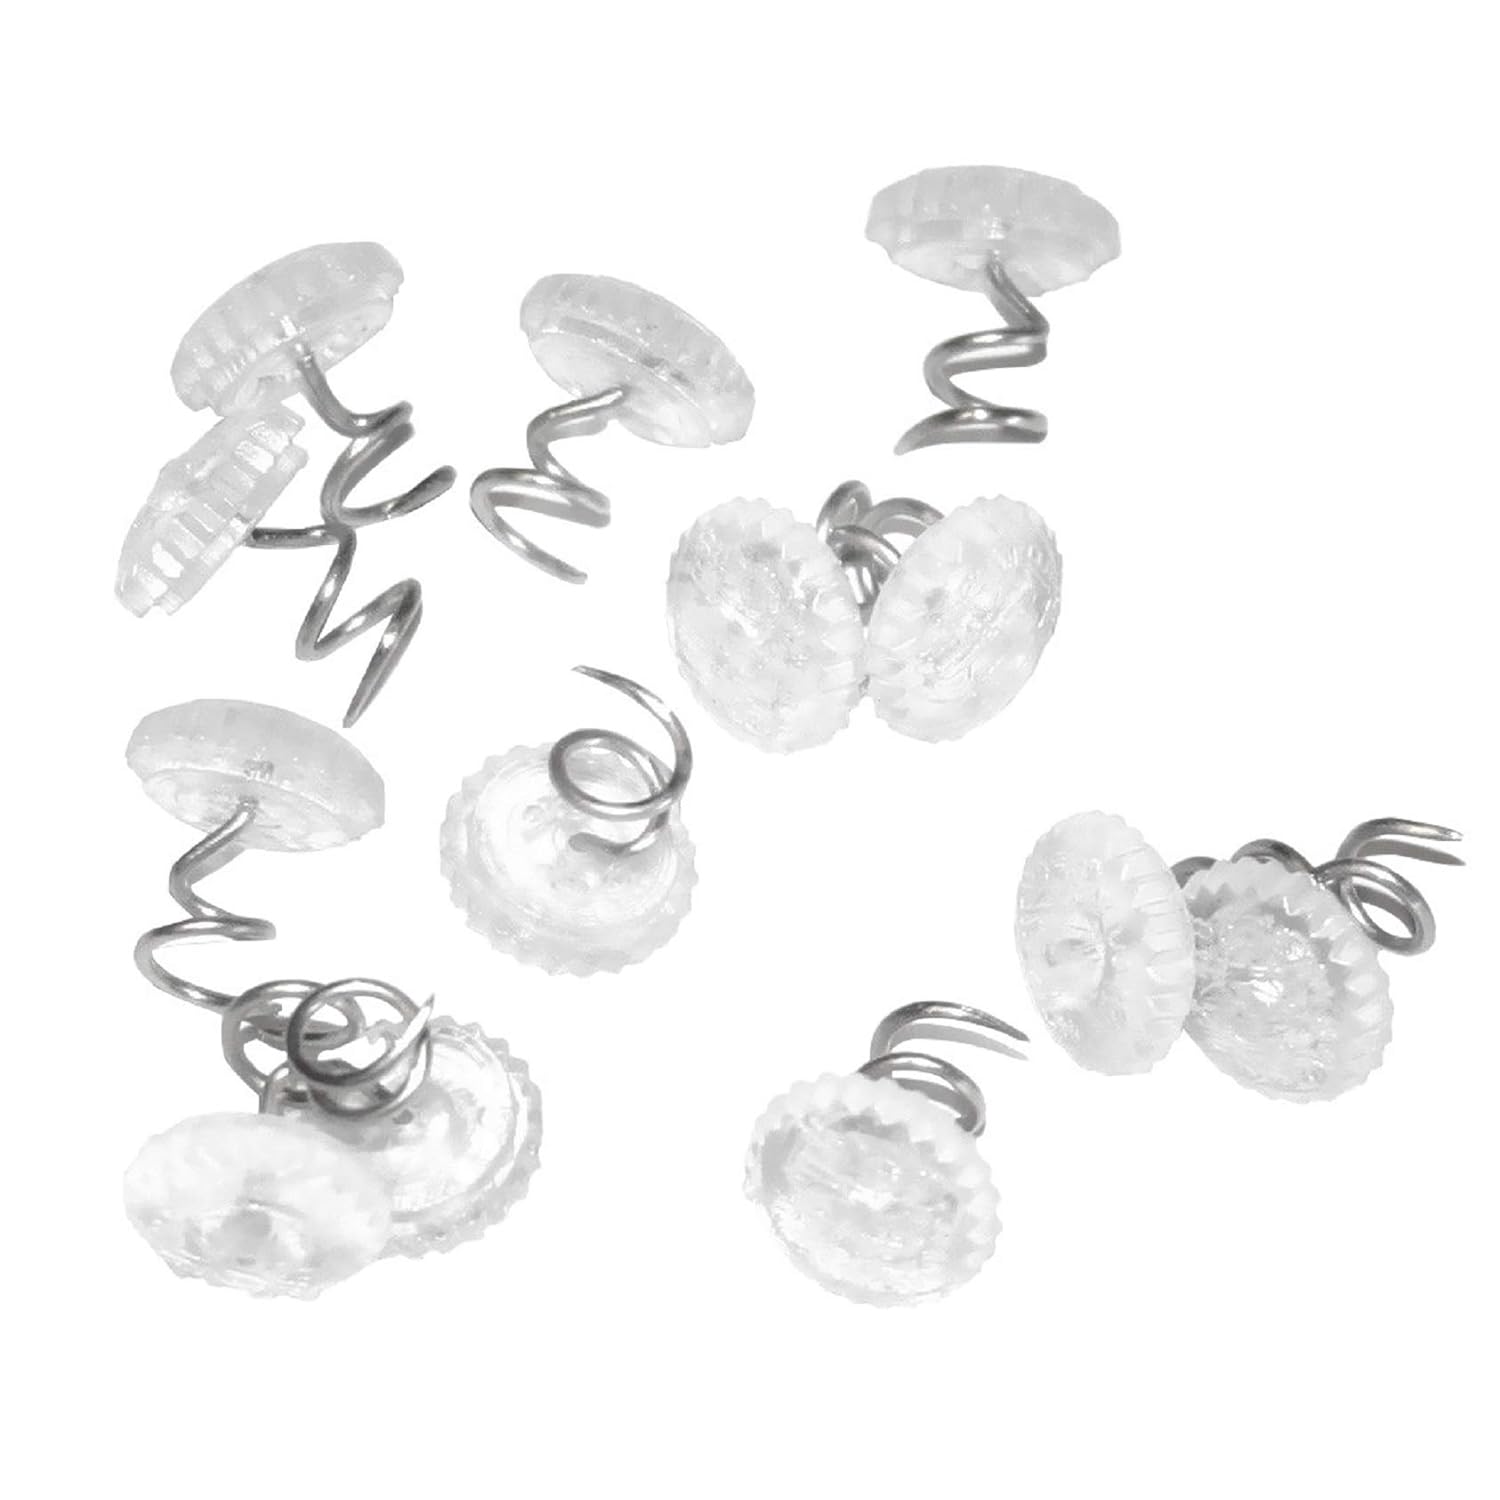 Great Choice Products 50 Pcs Upholstery Tacks Headliner Pins Clear Heads  Twist Pins For Slipcovers And Bedskirts, 0.5 Inches Bed Skirt Pins